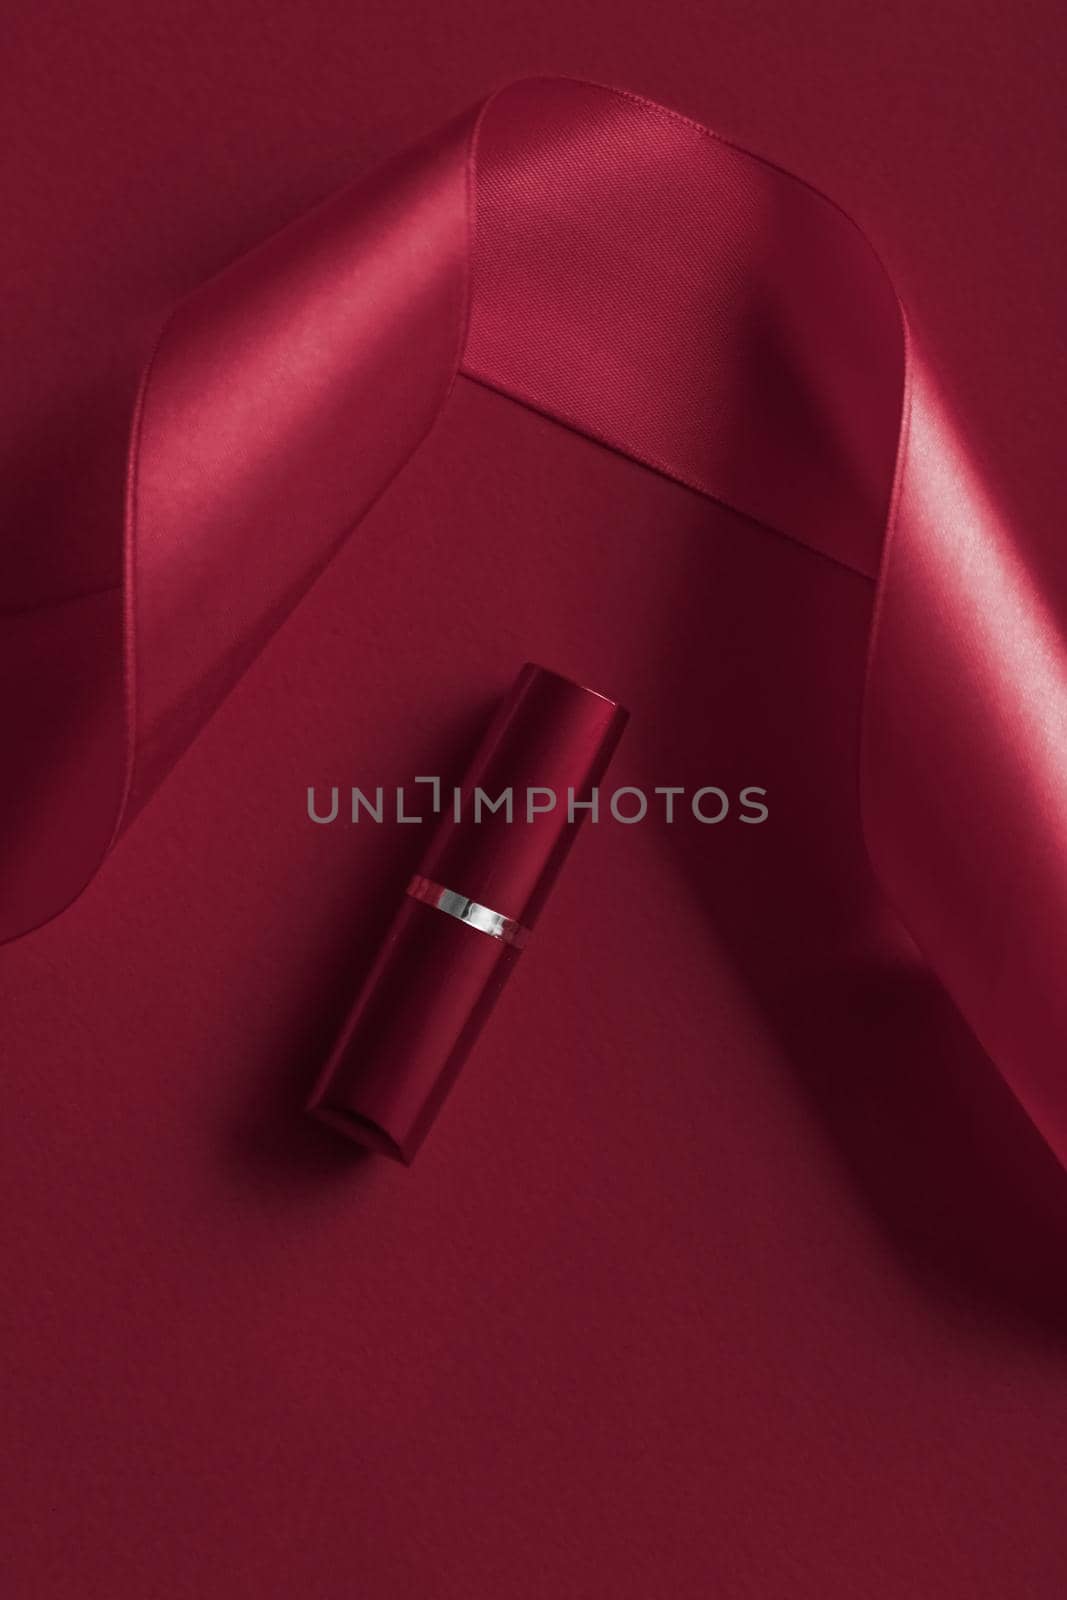 Cosmetic branding, glamour lip gloss and shopping sale concept - Luxury lipstick and silk ribbon on maroon holiday background, make-up and cosmetics flatlay for beauty brand product design